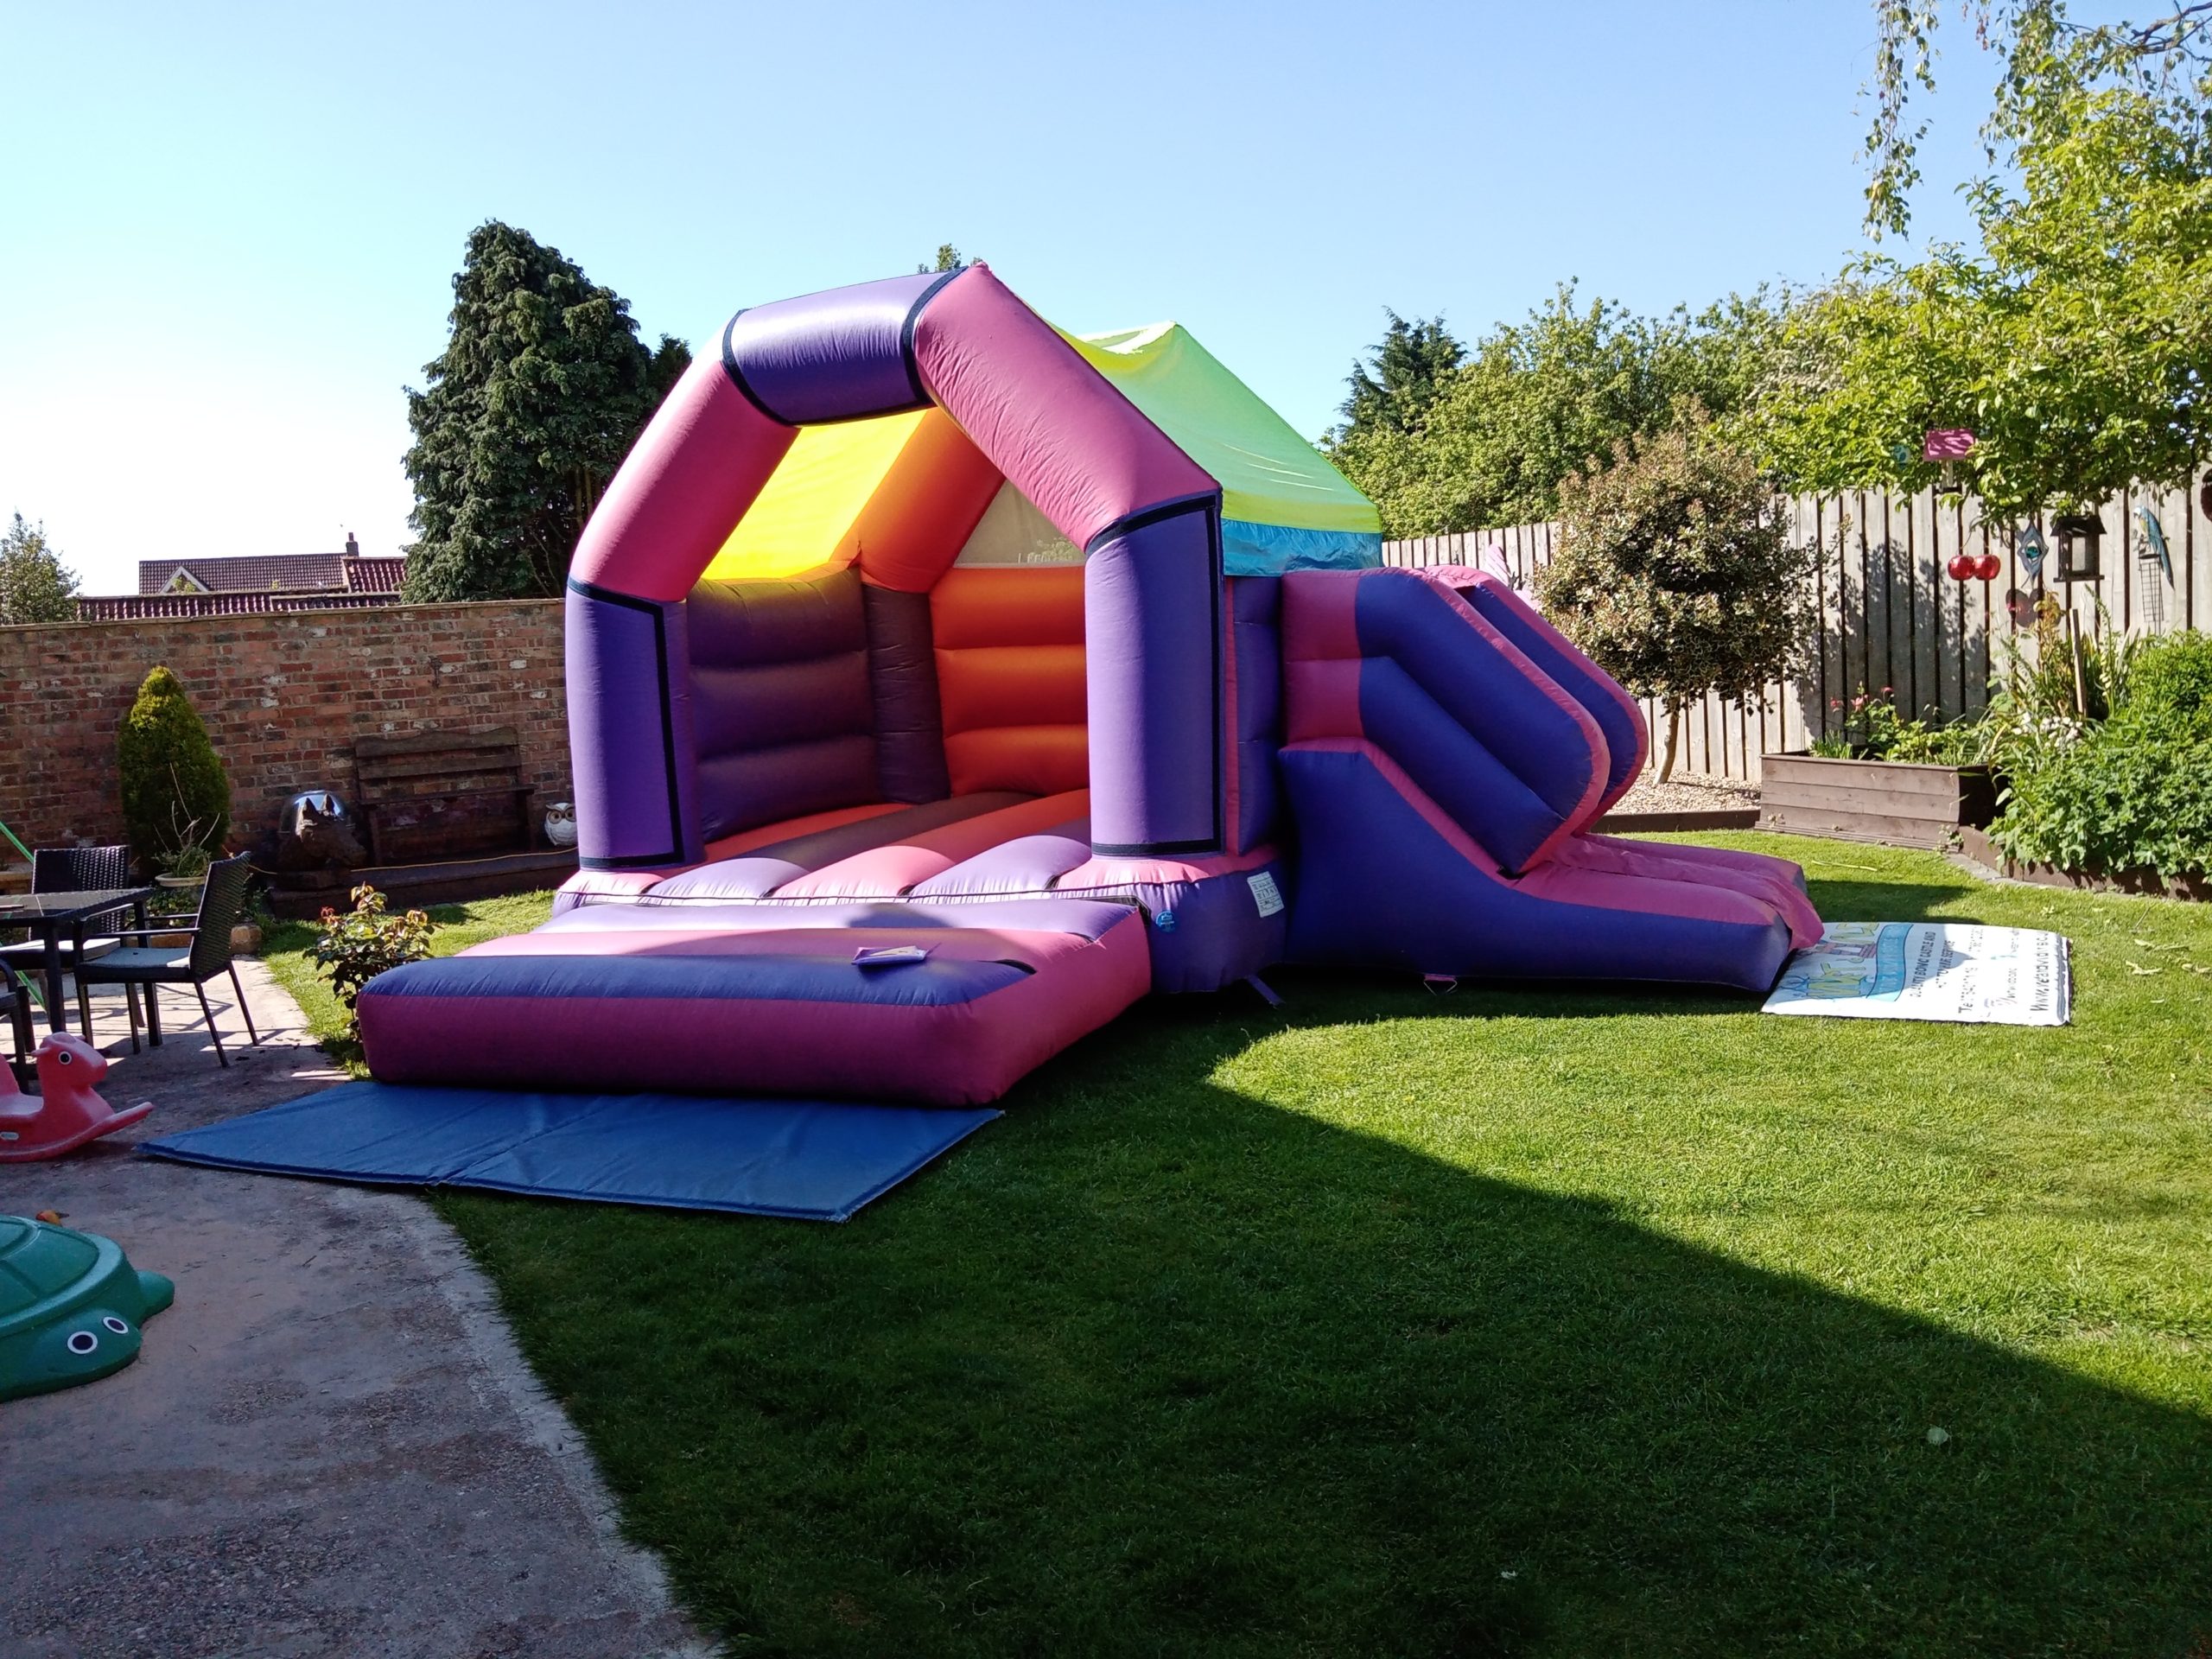 Large bouncy castle with slide, ideal for a summer party